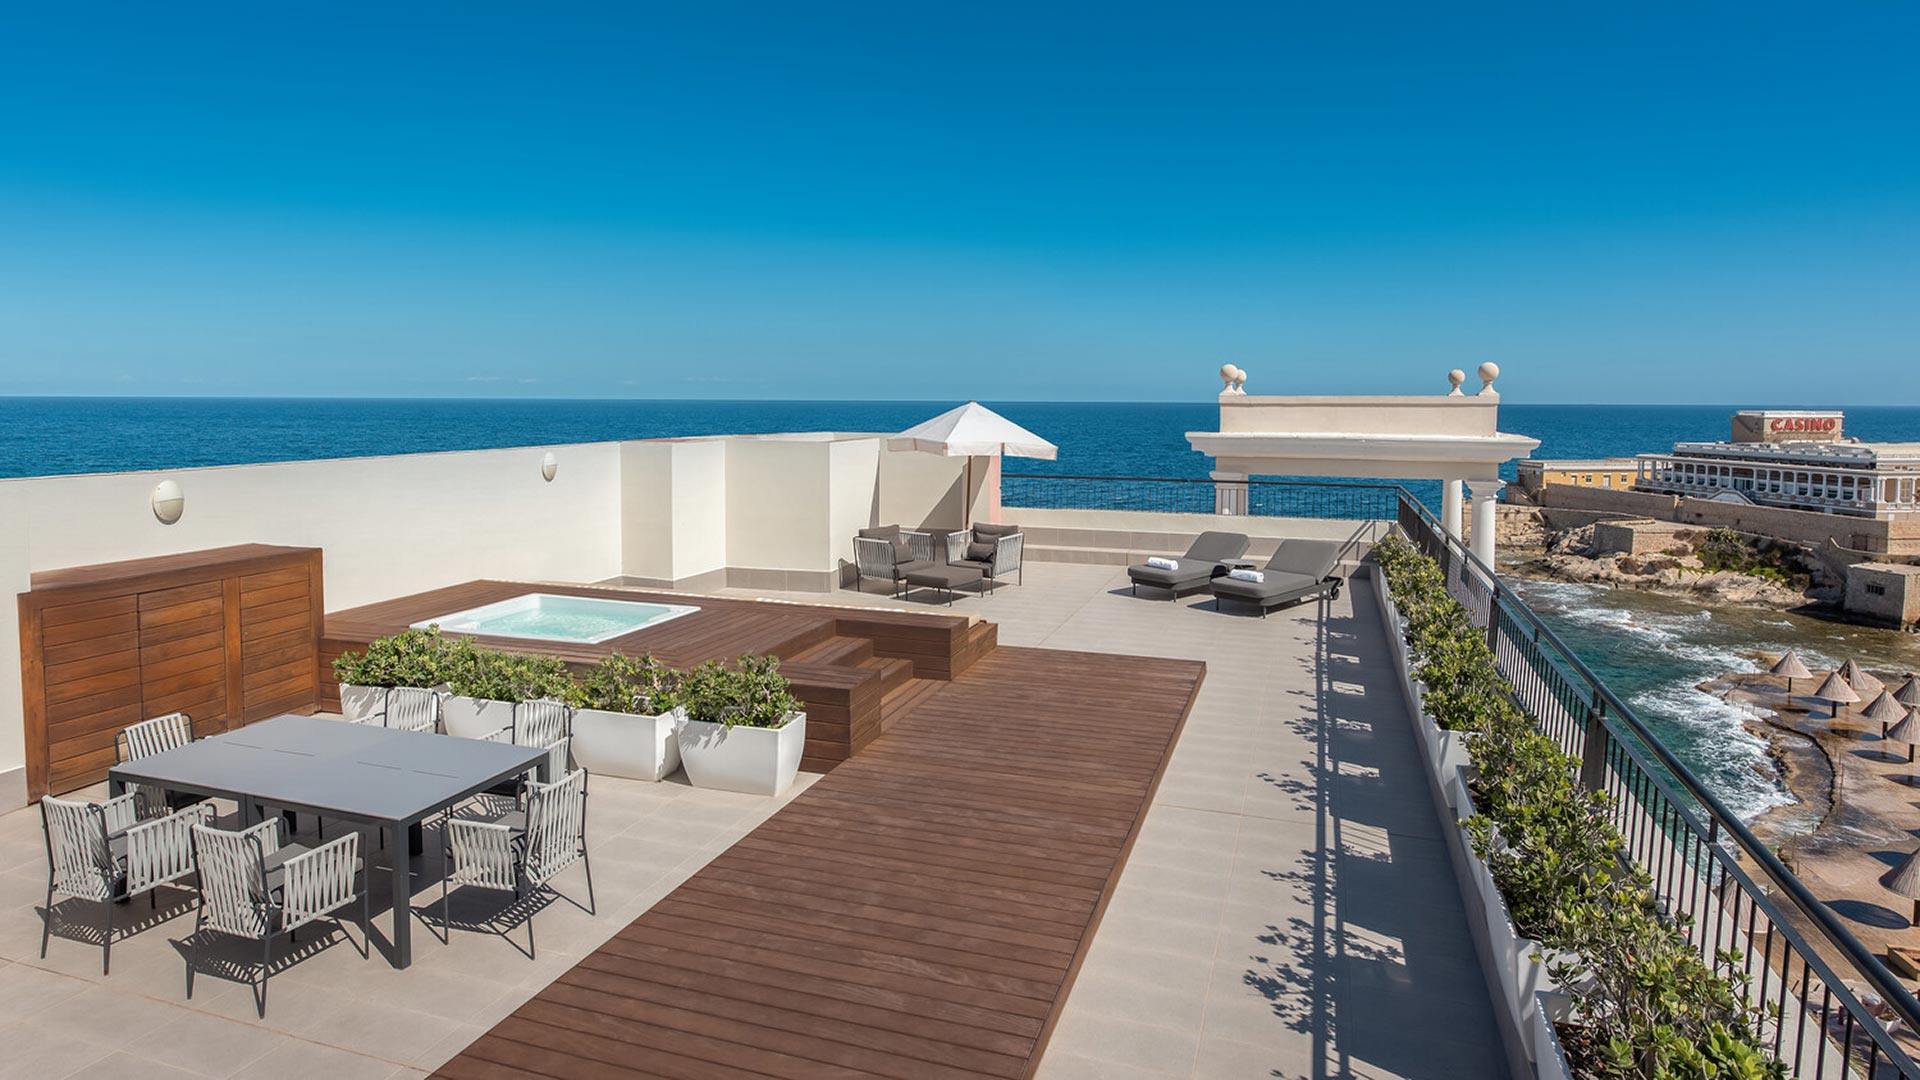 large private terrace outside of a luxury ocean-side suite with a wooden walk-way to a hot tub and an outdoor table and chairs set